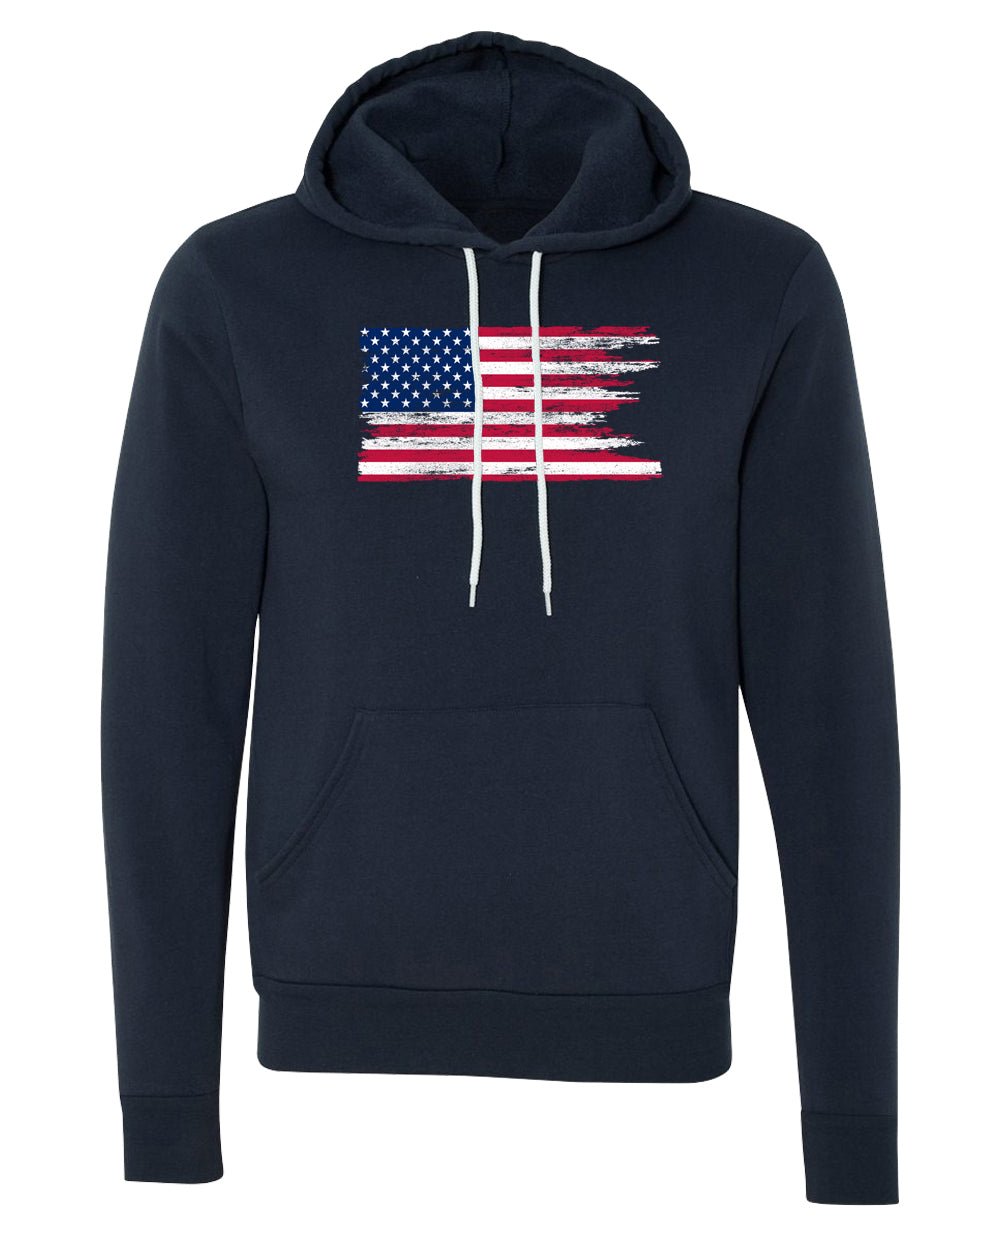 Distressed American Flag Unisex 4th of July Hoodies - Mato & Hash